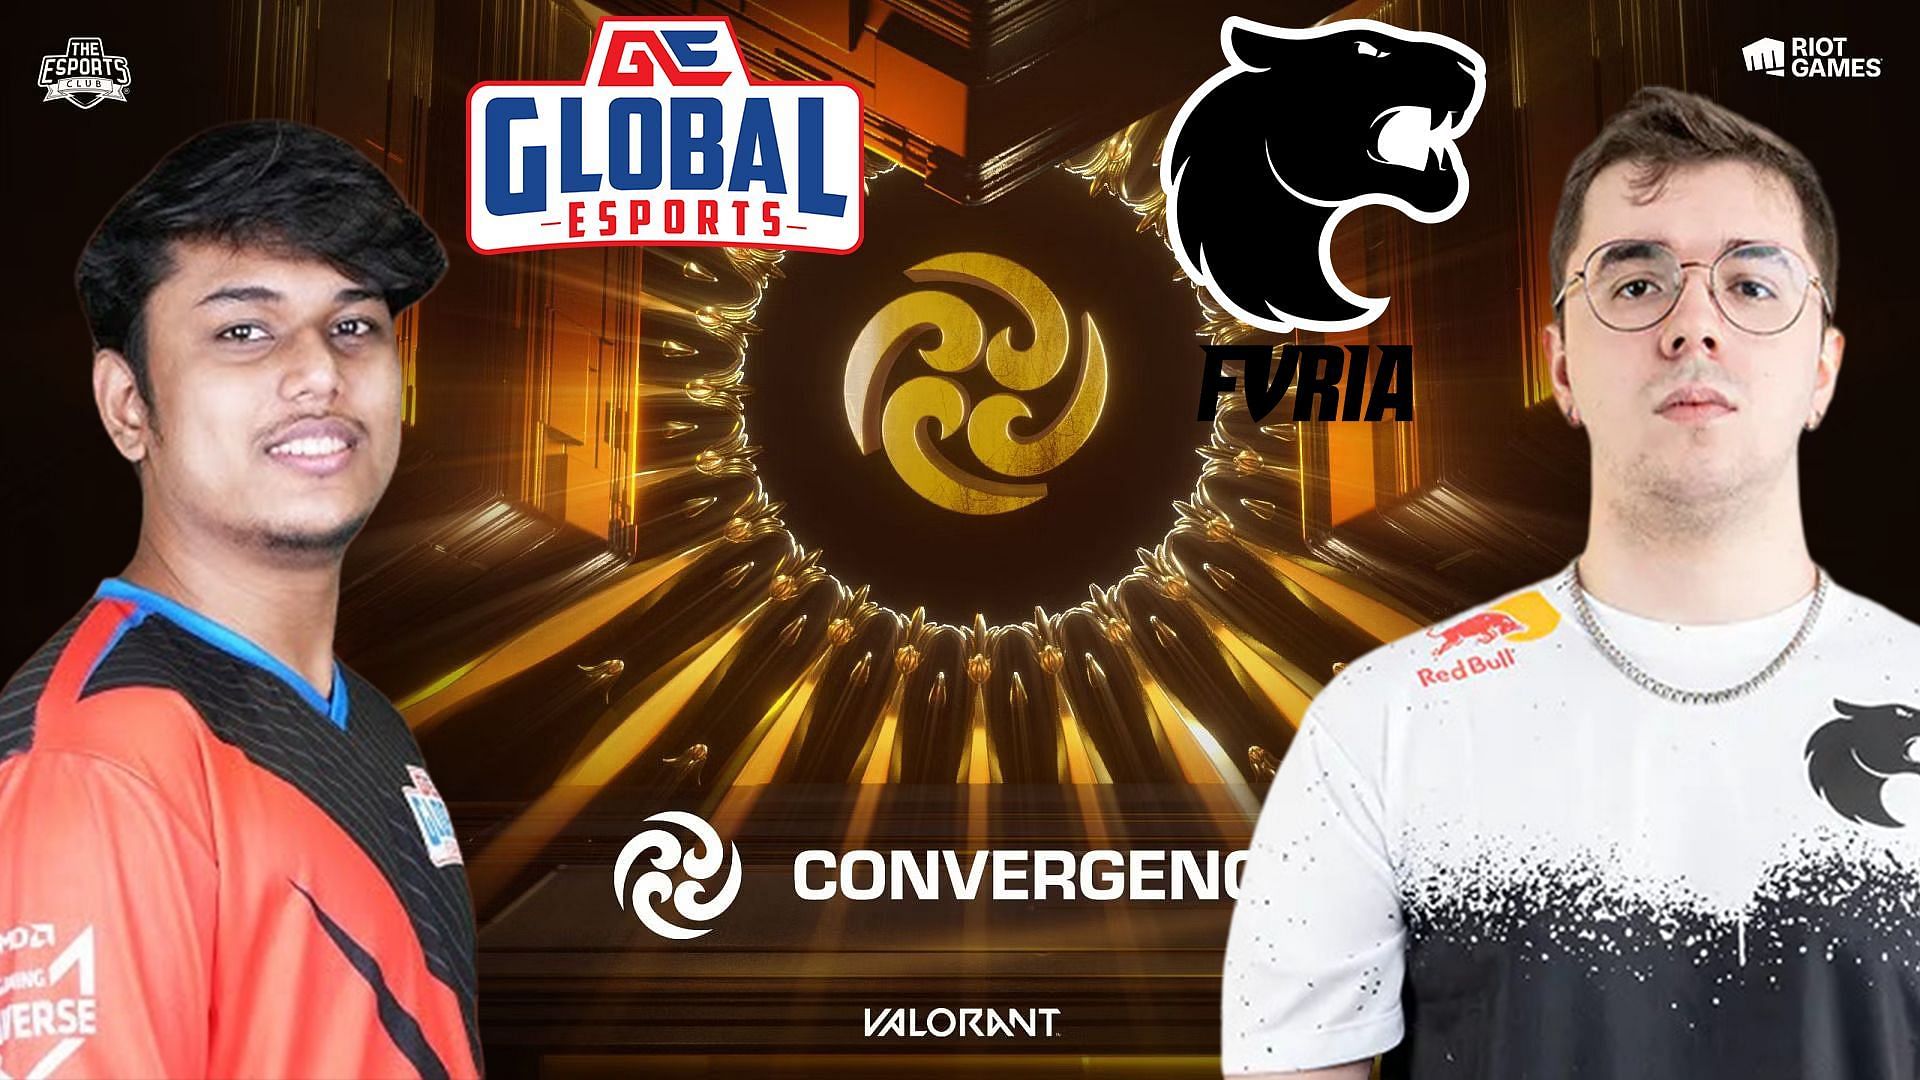 FTX Becomes FURIA Sponsor. Esports industry news - eSports events review,  analytics, announcements, interviews, statistics - GI5f6dBTW